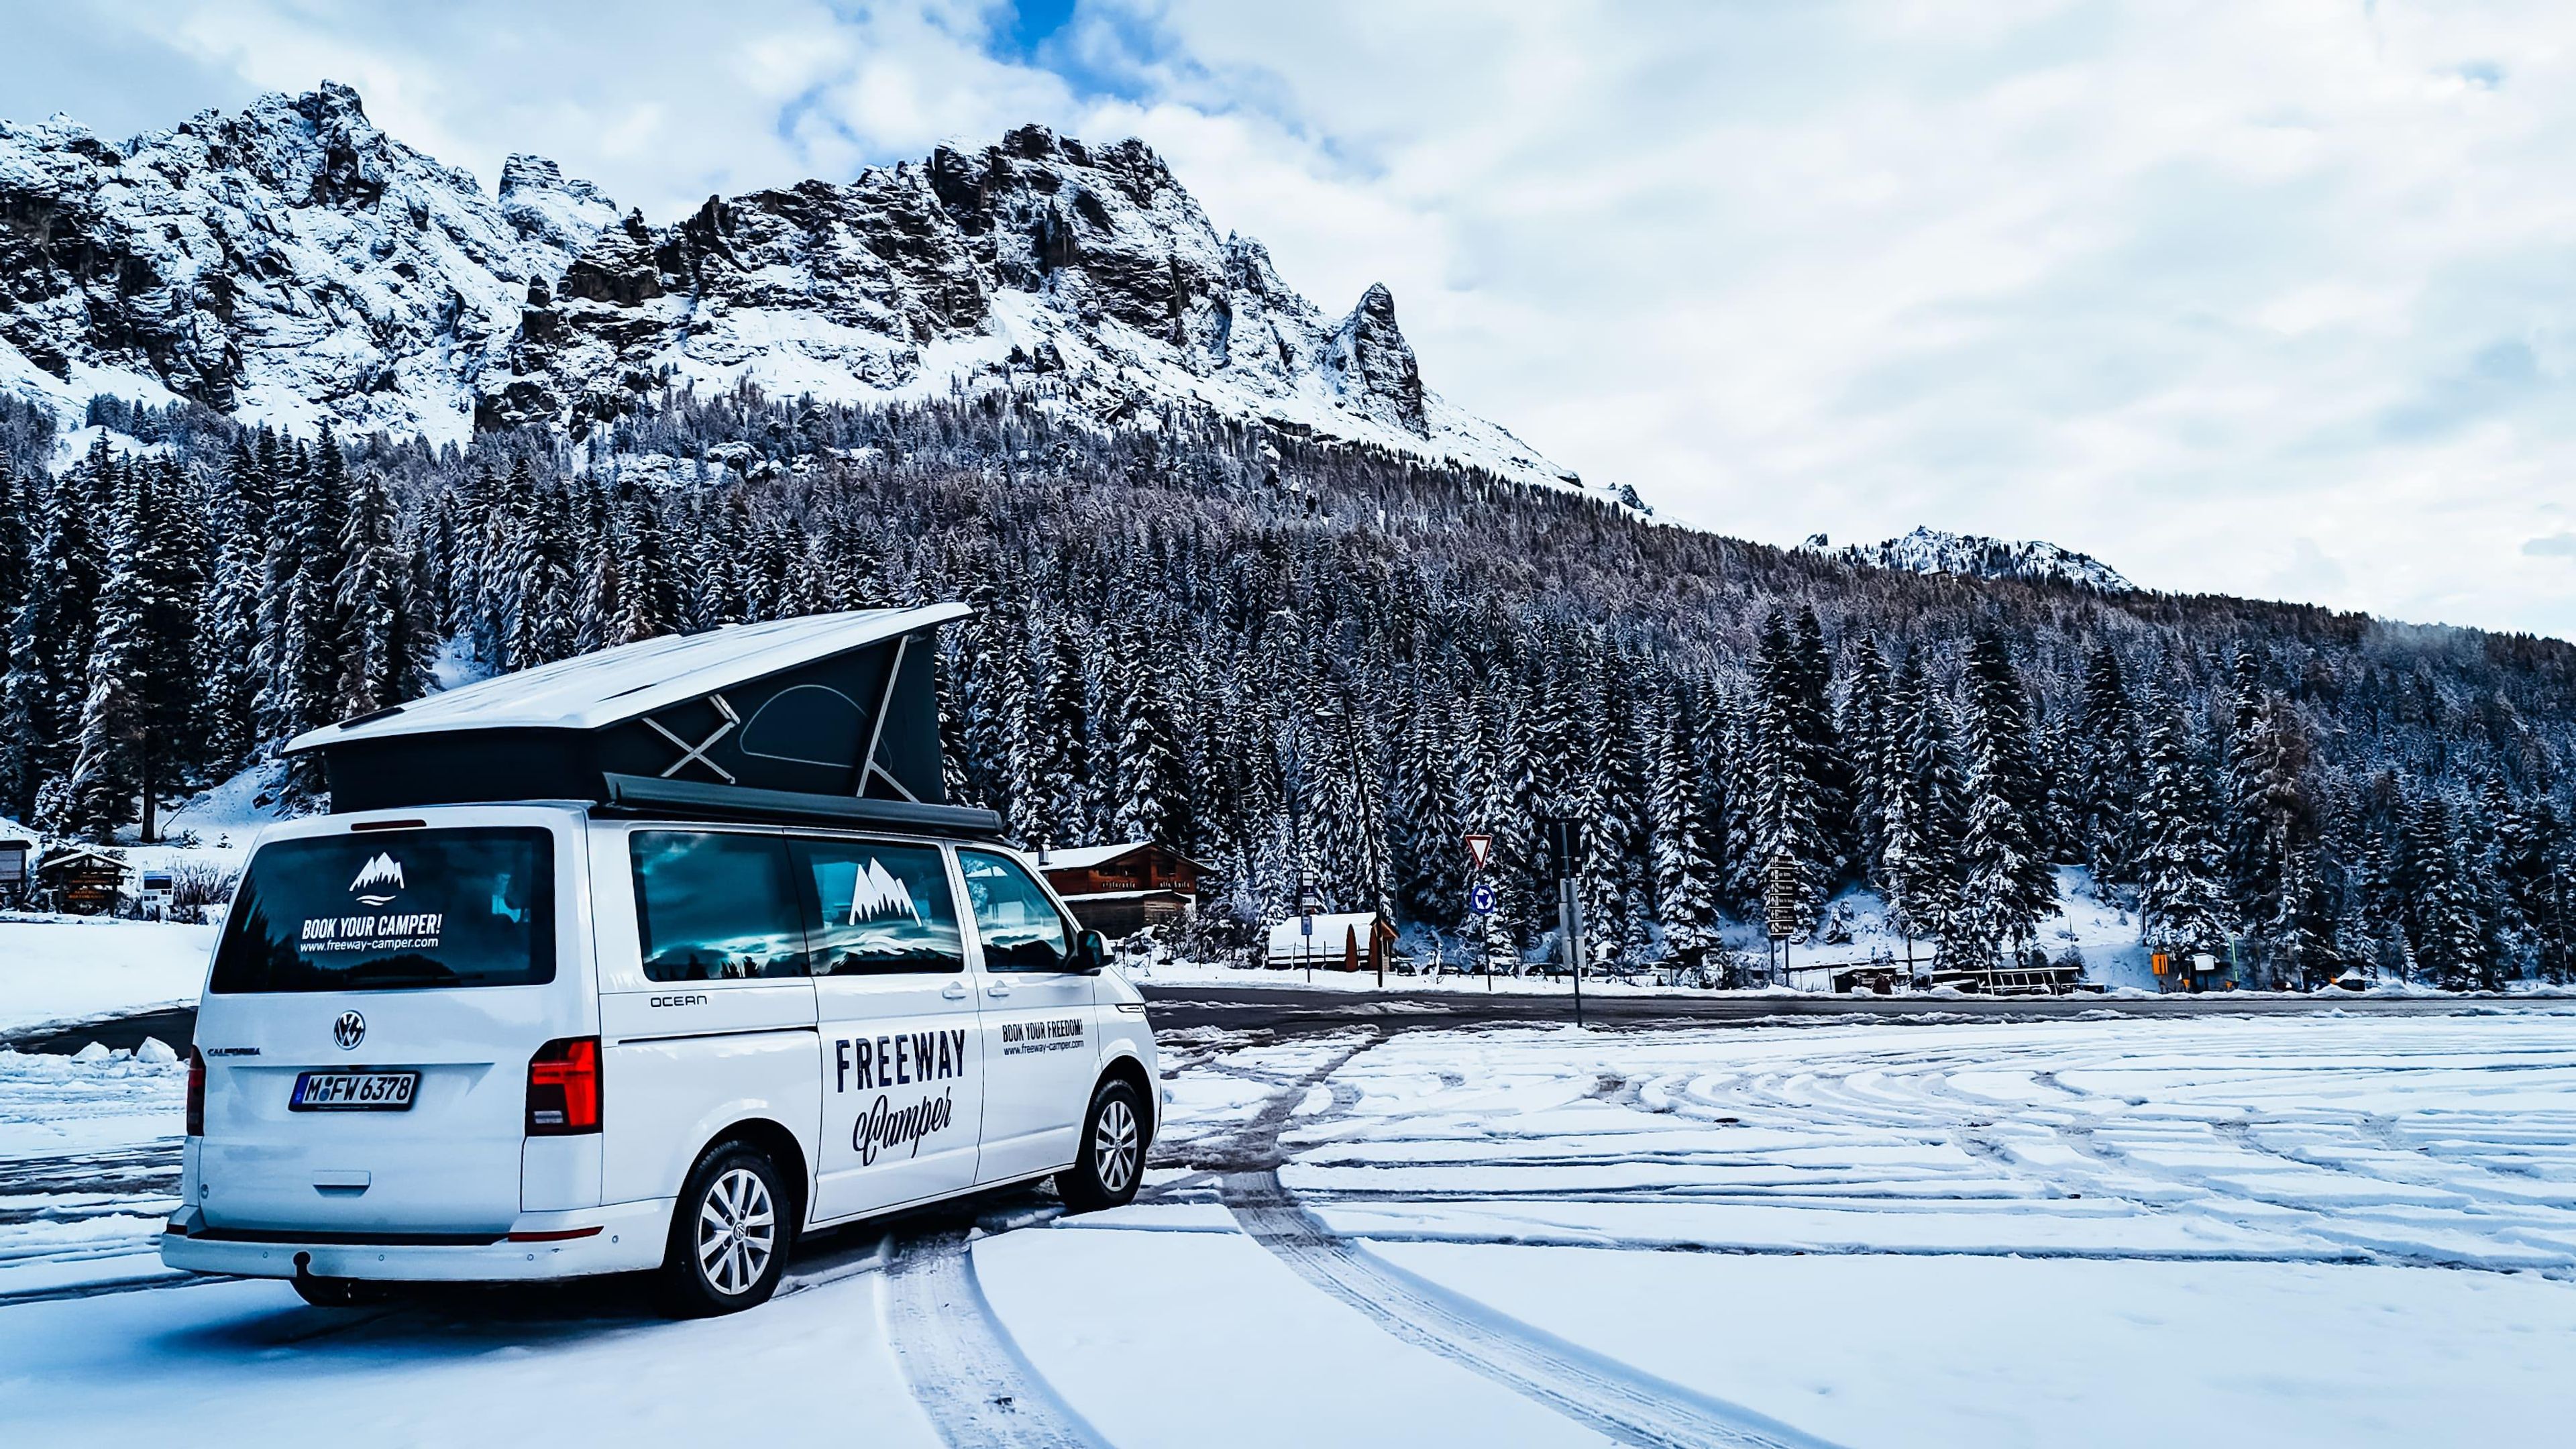 VW Bulli with pop-up roof in the snowy mountains, Italy